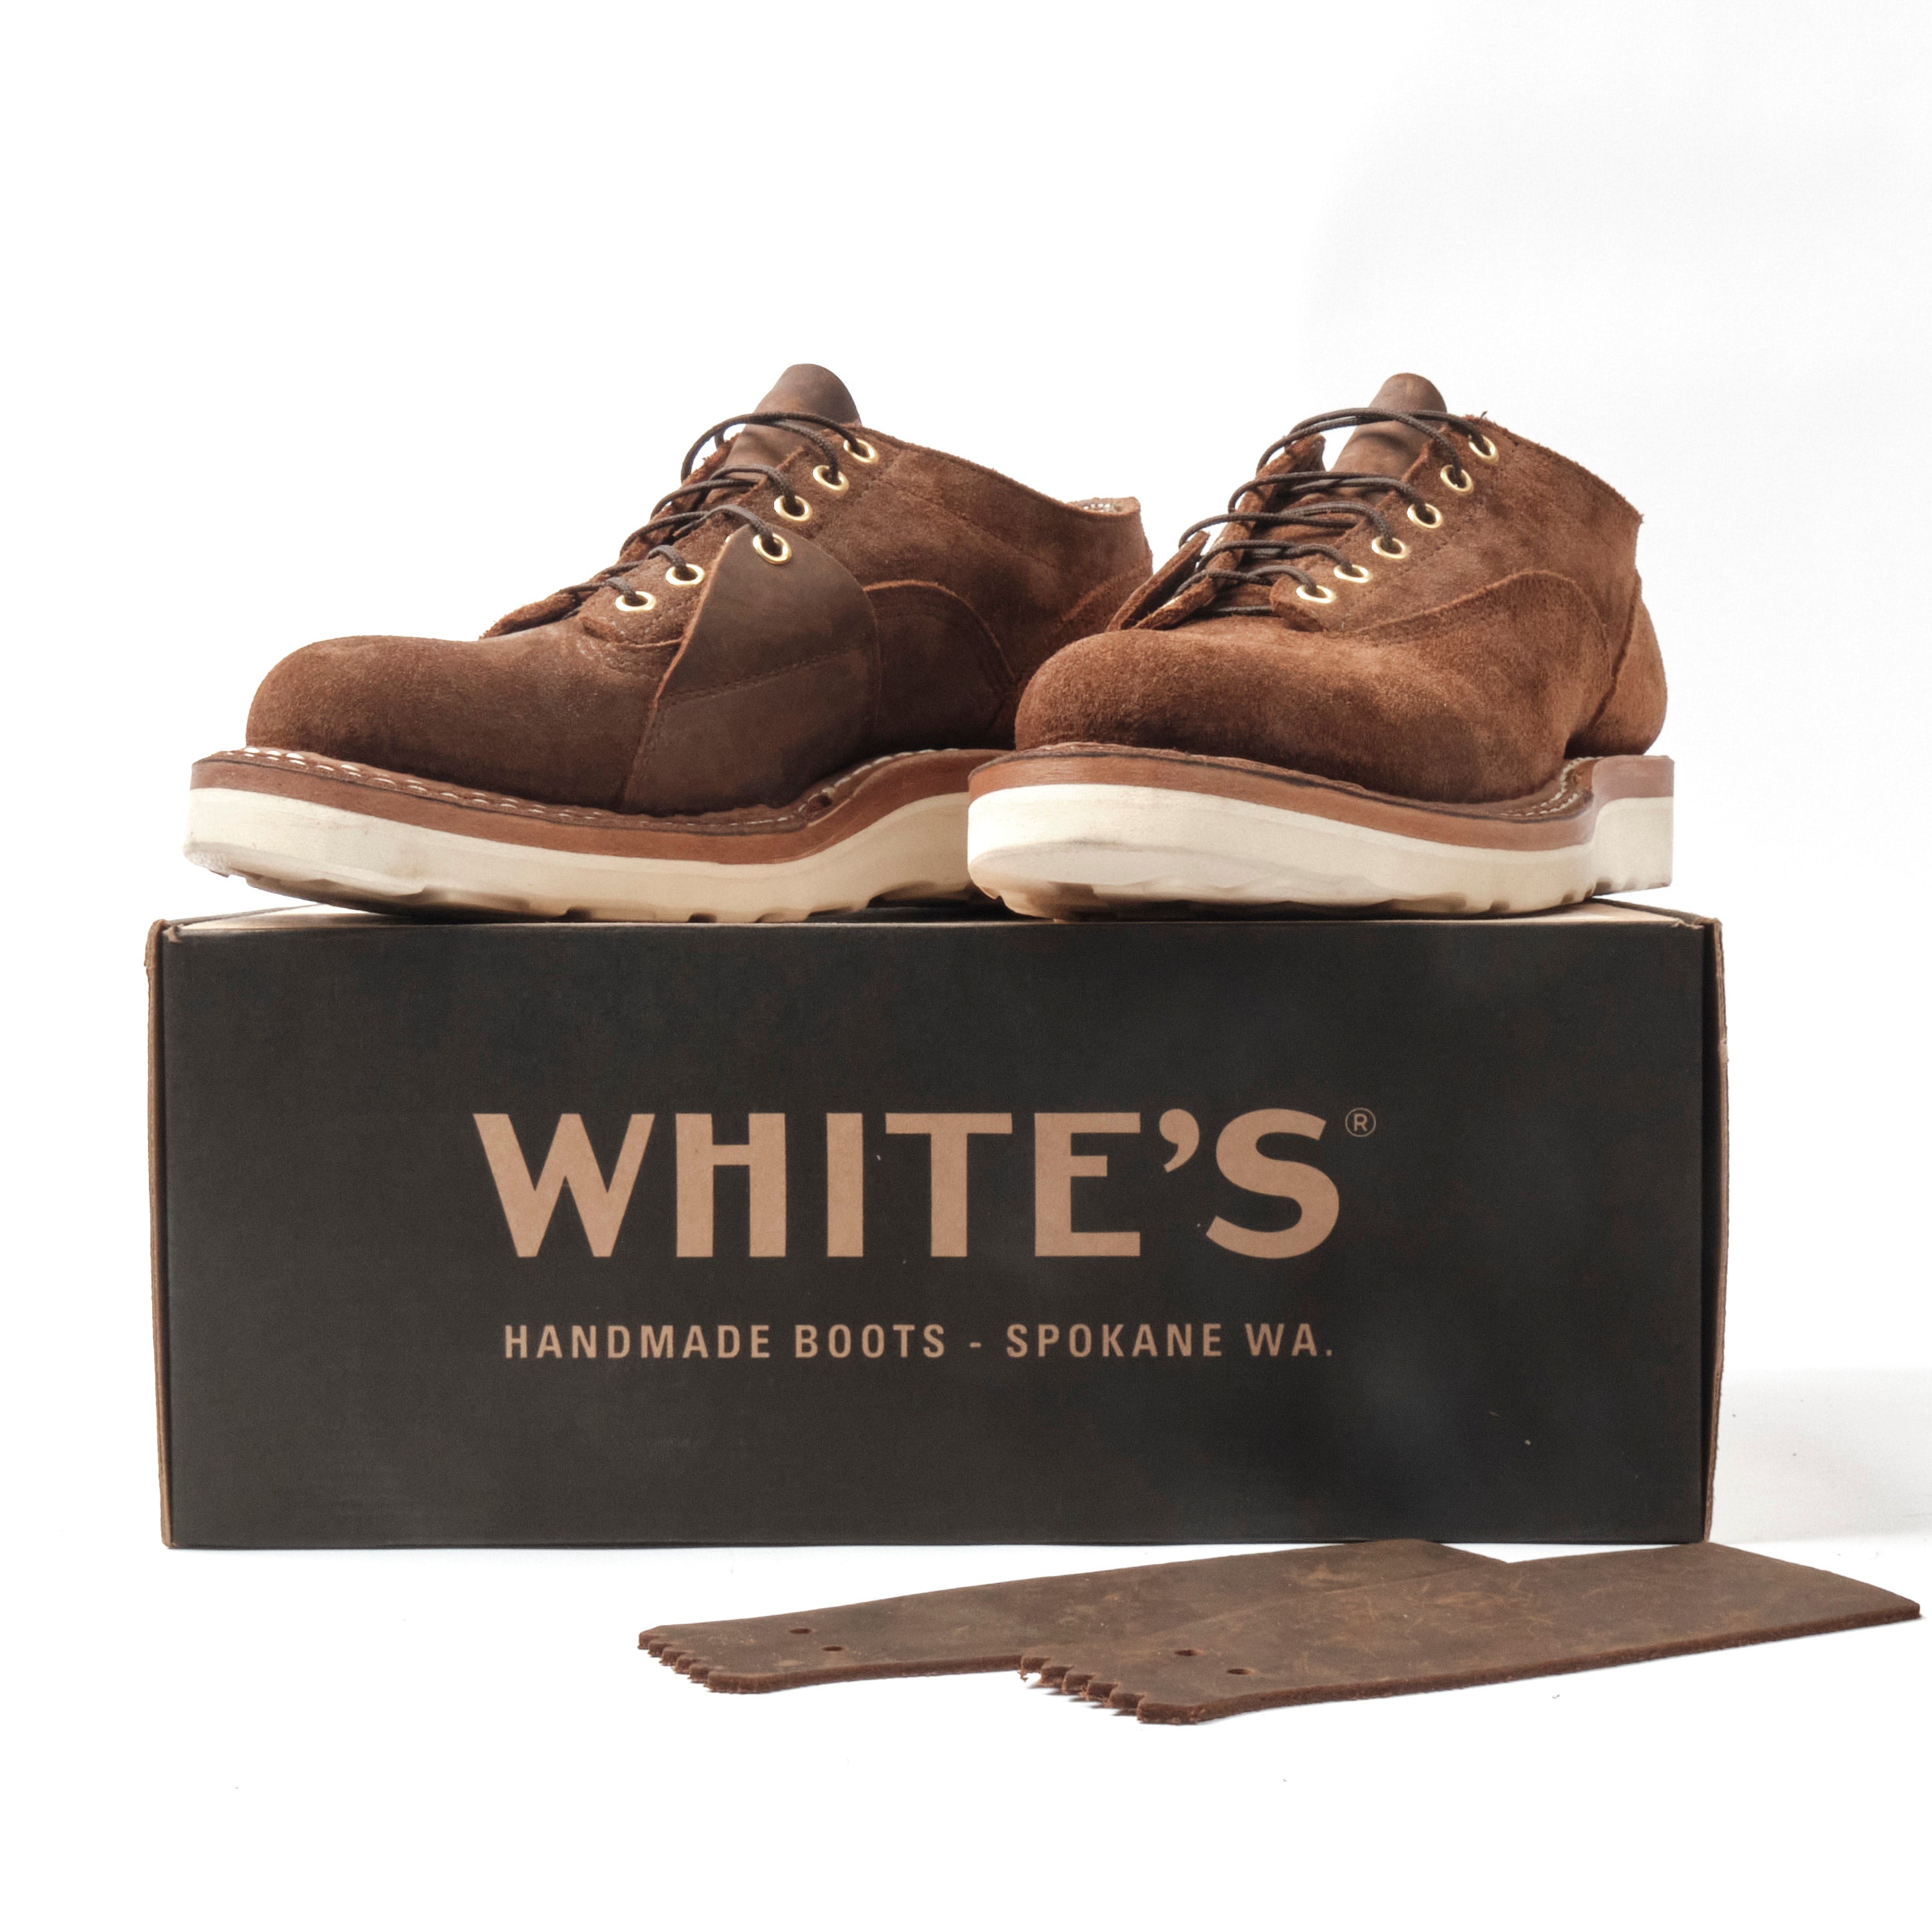 FREENOTE CLOTH X WHITE'S BOOTS - OXFORD LTT - DISTRESSED ROUGHOUT